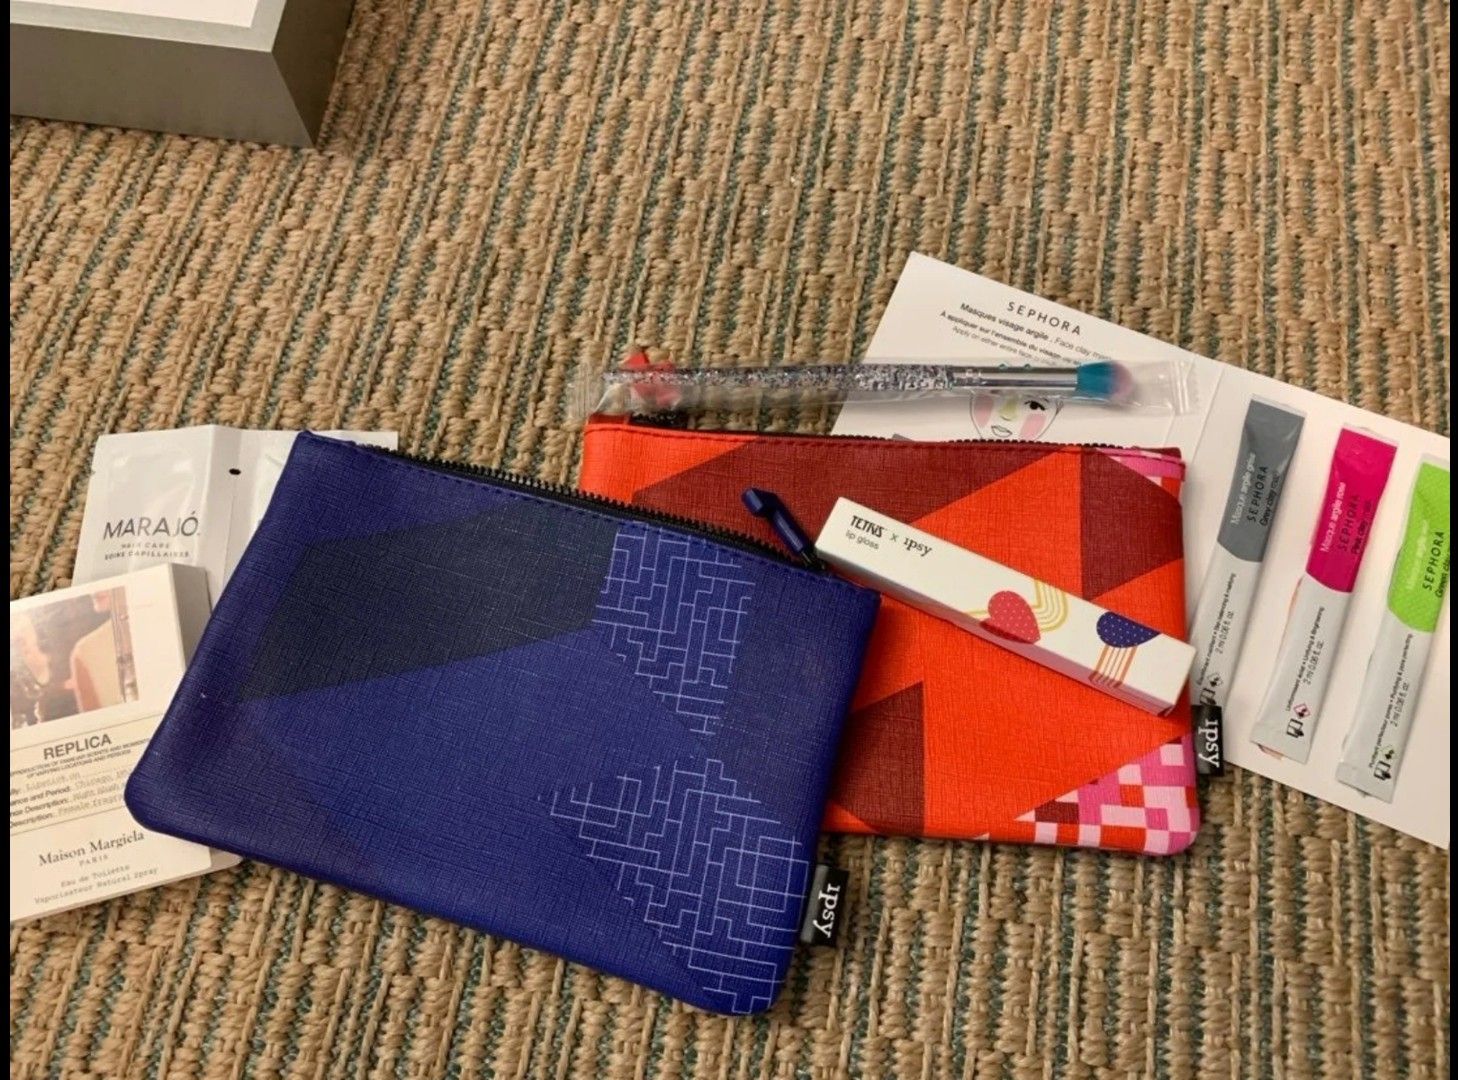 Ipsy glam bags